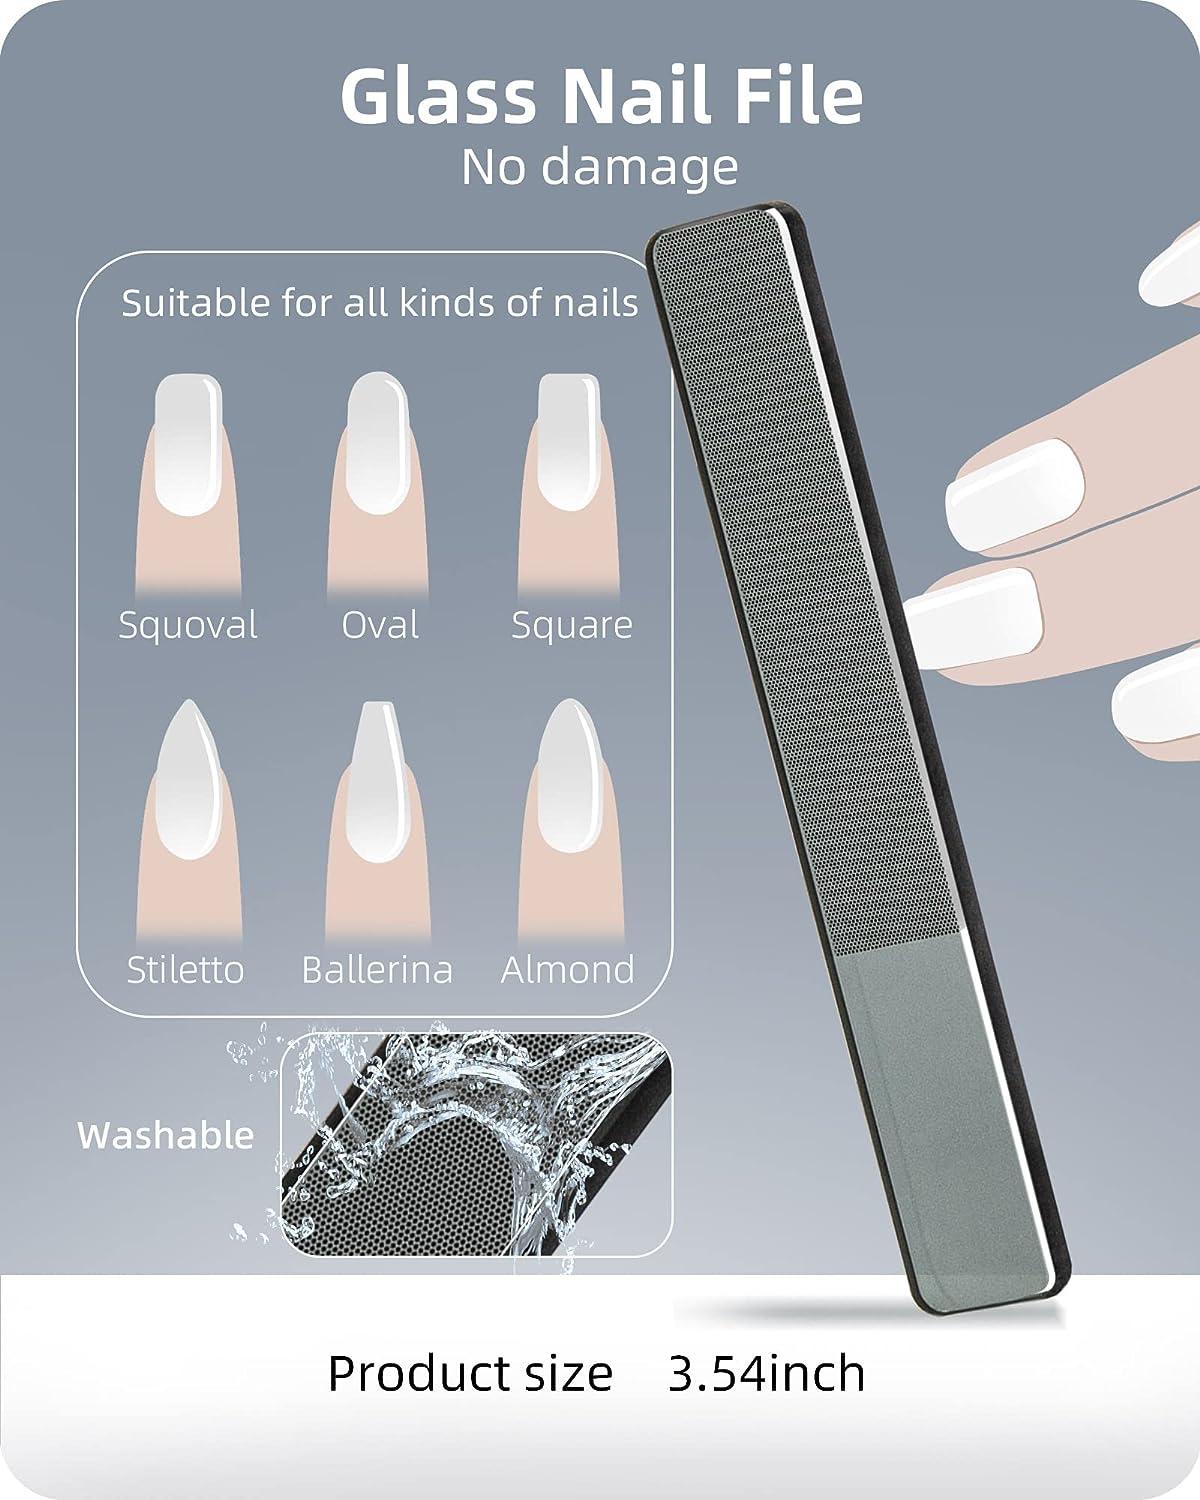  Toenail Clippers for Seniors Thick Toenails - Wide Jaw